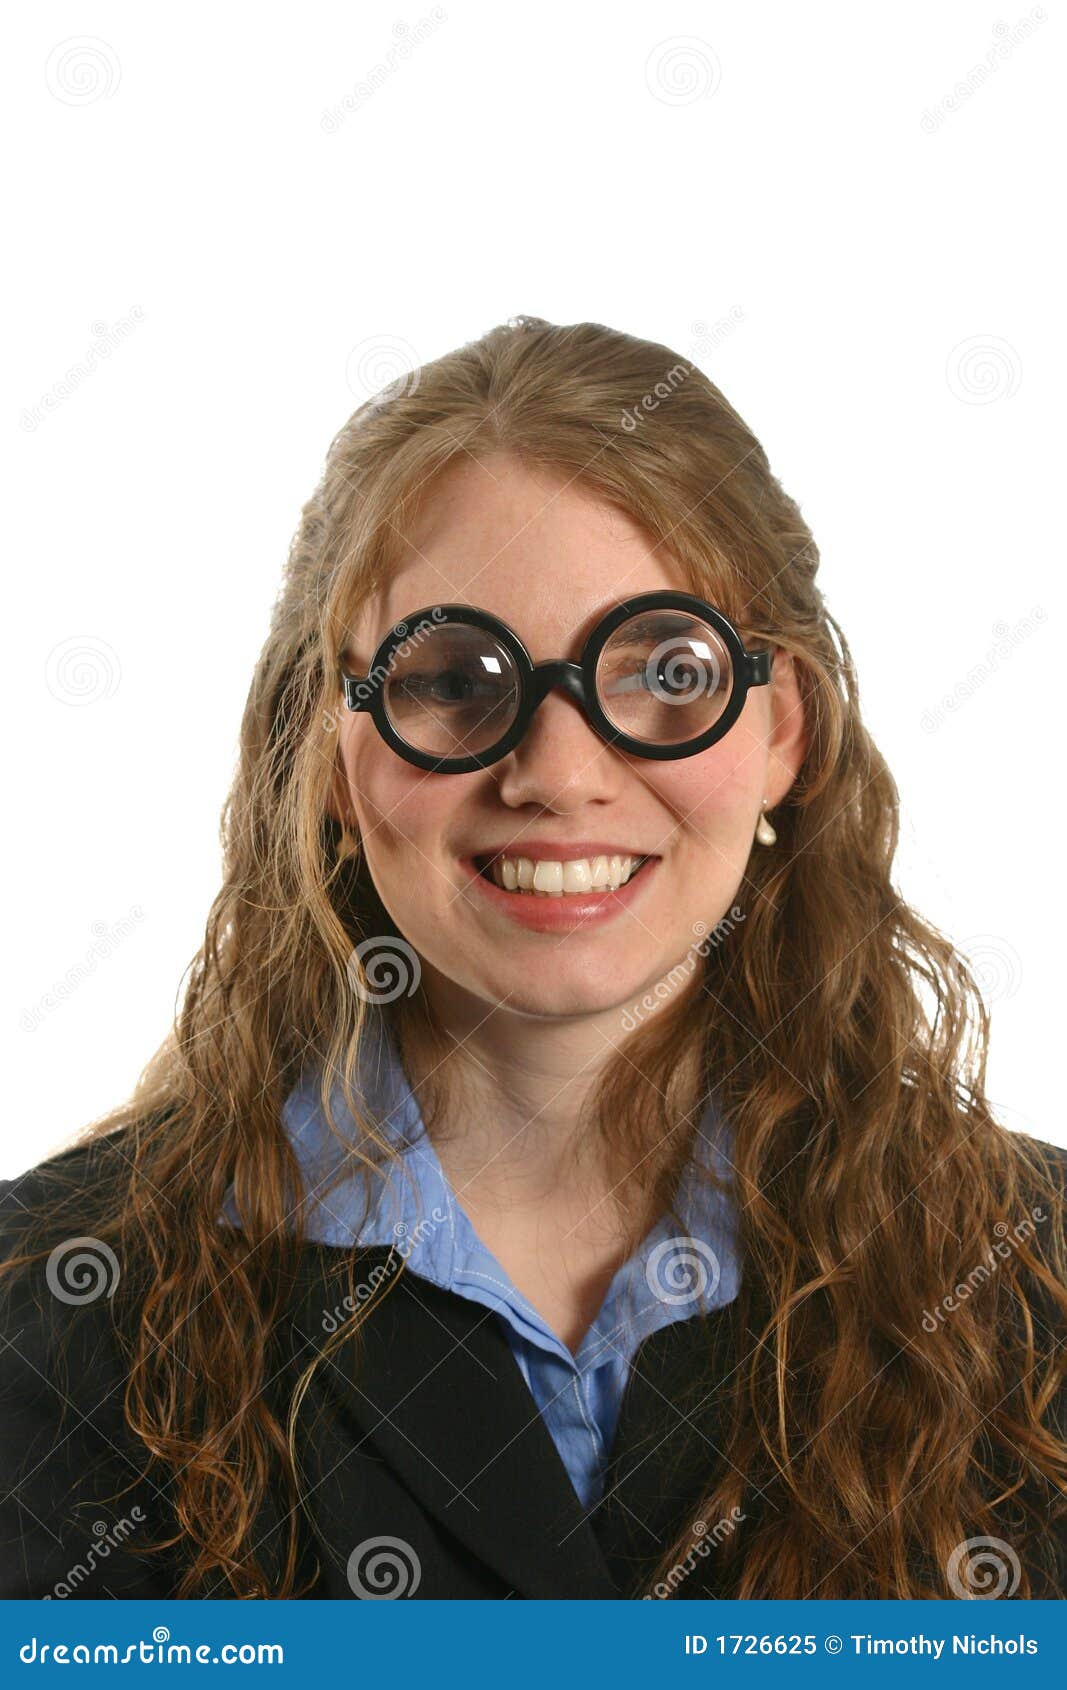 Unusual Expression With Smile On Woman With Thick Glasses In Business ... People With Thick Glasses